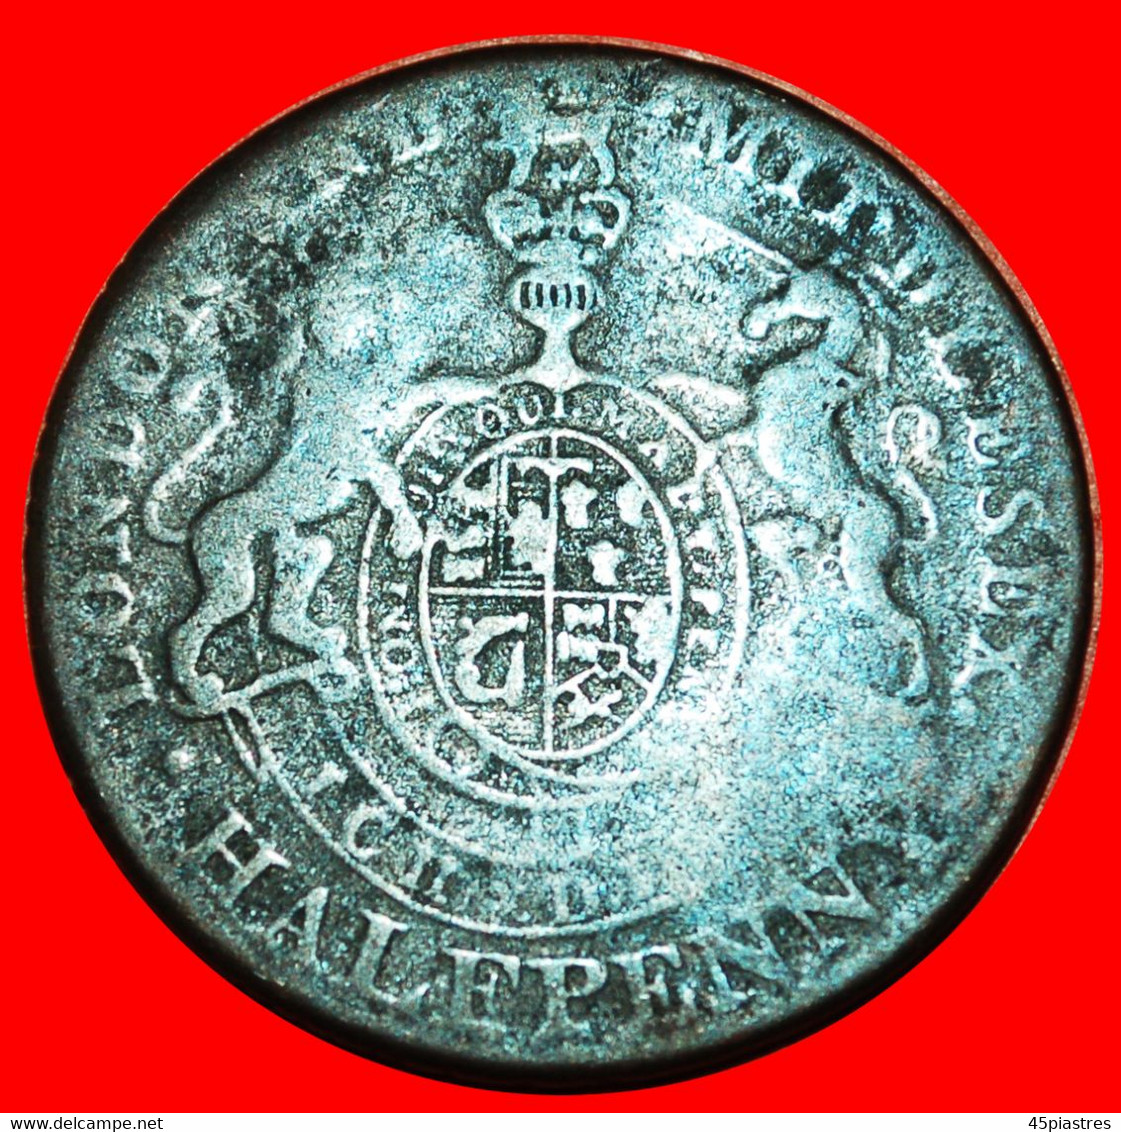 * CONDER PENNY: IRELAND And GREAT BRITAIN ★ HALFPENNY (1787-1797) GEO PRINCE OF WALES! LOW START ★ NO RESERVE! - Maundy Sets & Gedenkmünzen